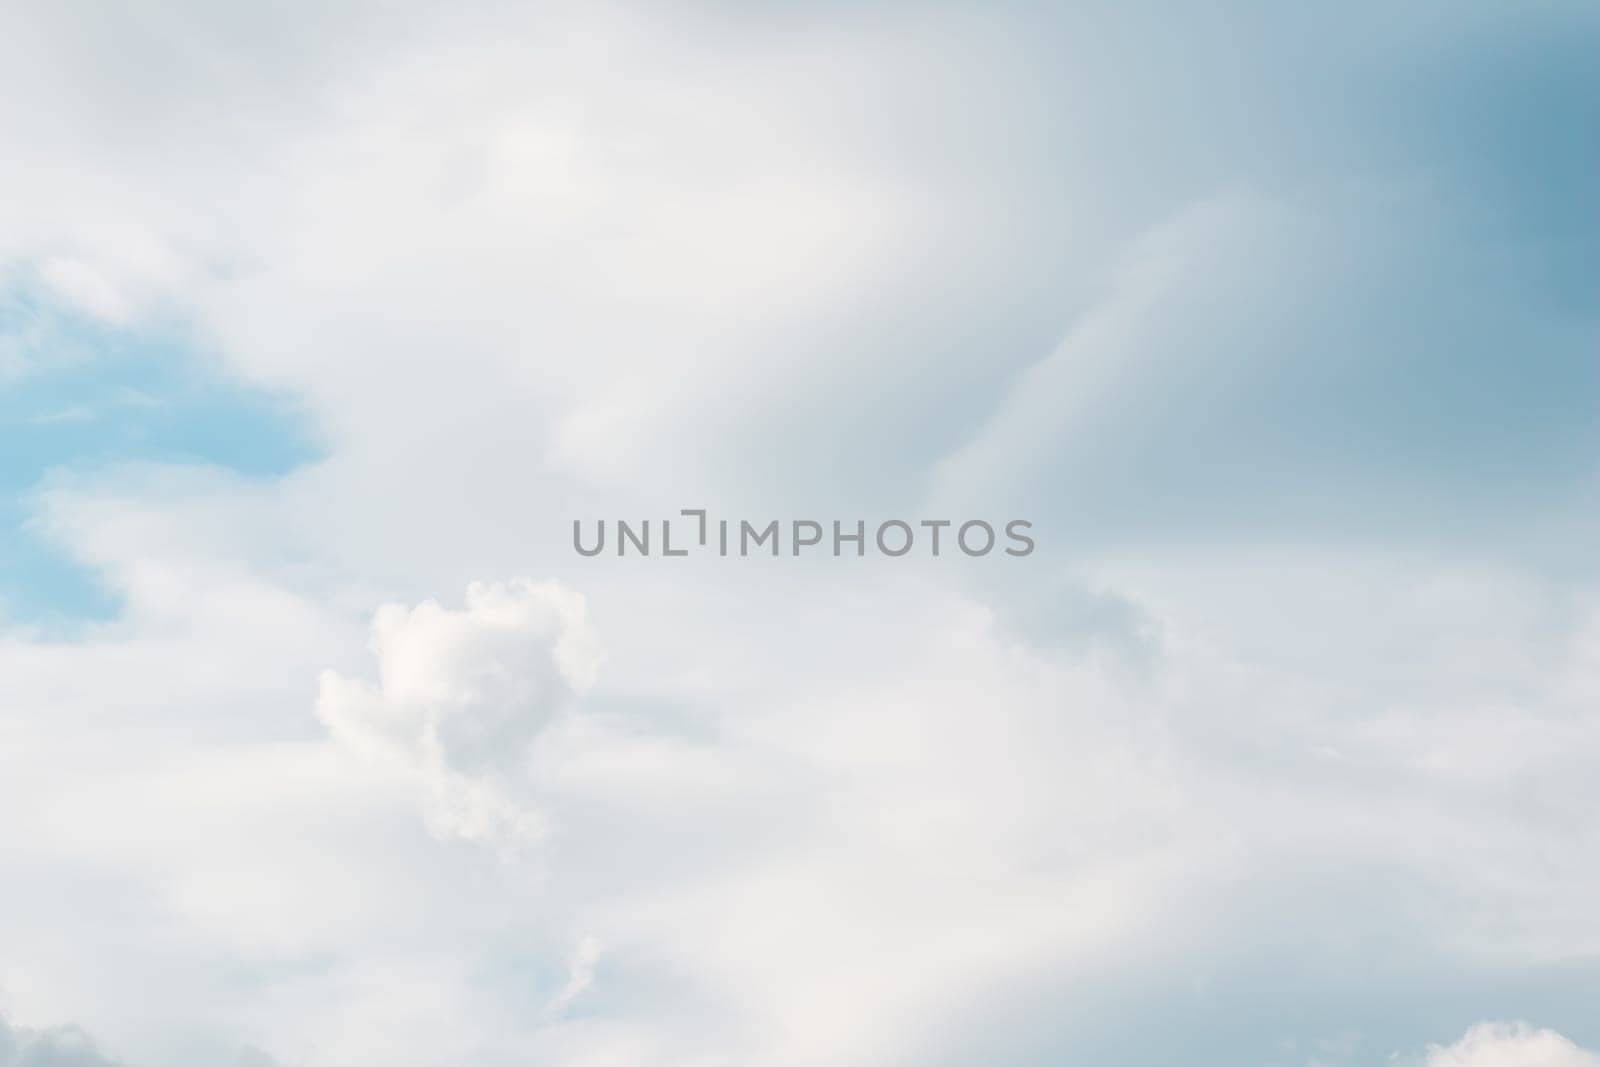 Background of blue sky with beautiful natural white clouds.